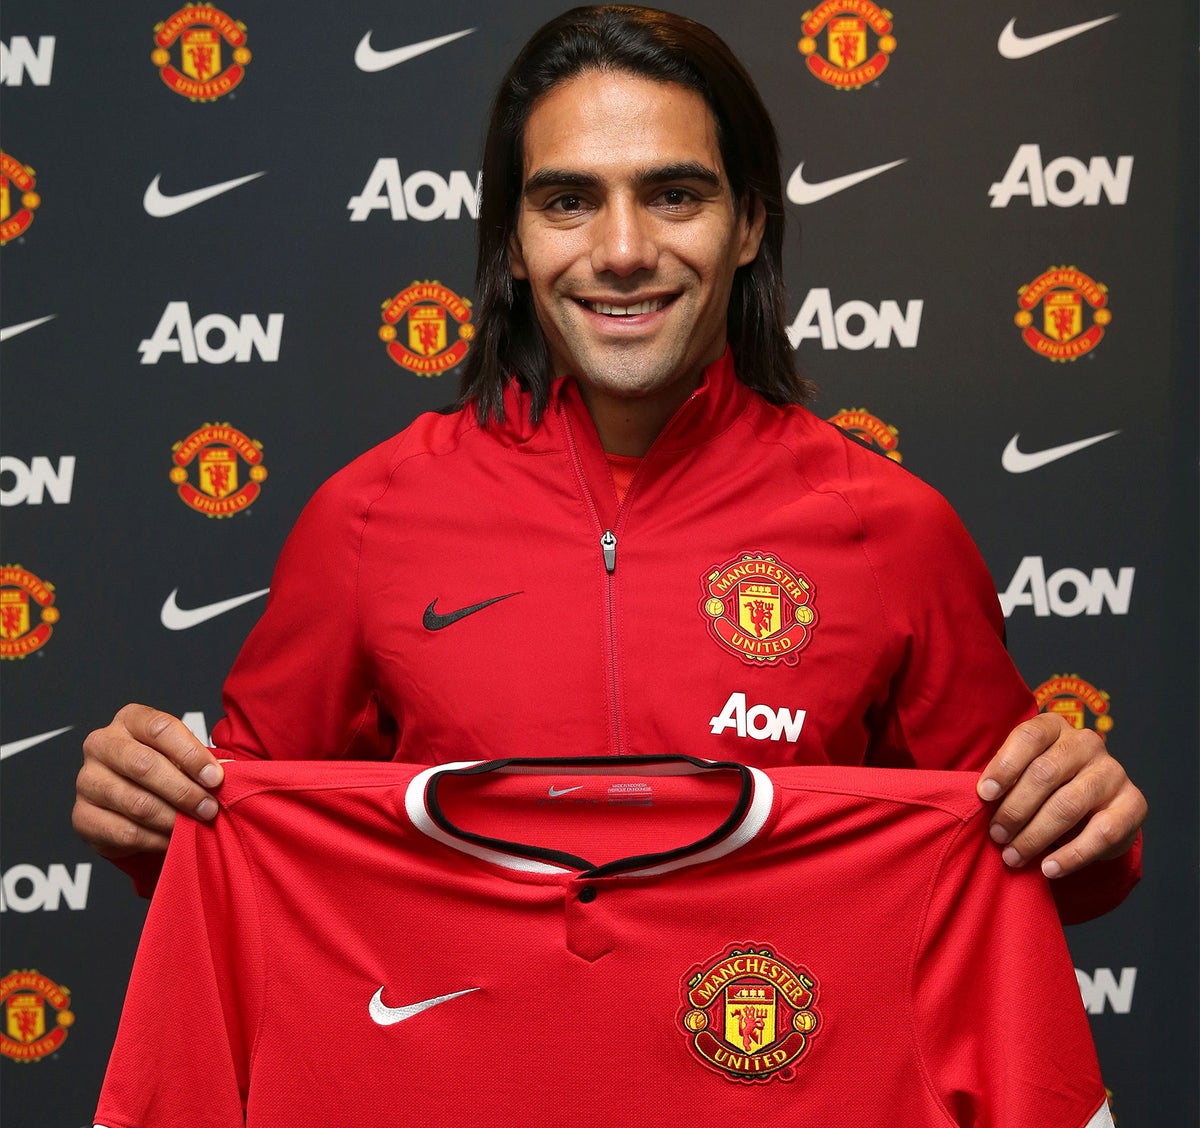 Radamel Falcao Joins Manchester United Surprise Transfer Wasn T A Shock As Striker Reveals Talks Were Held For Some Months The Independent The Independent